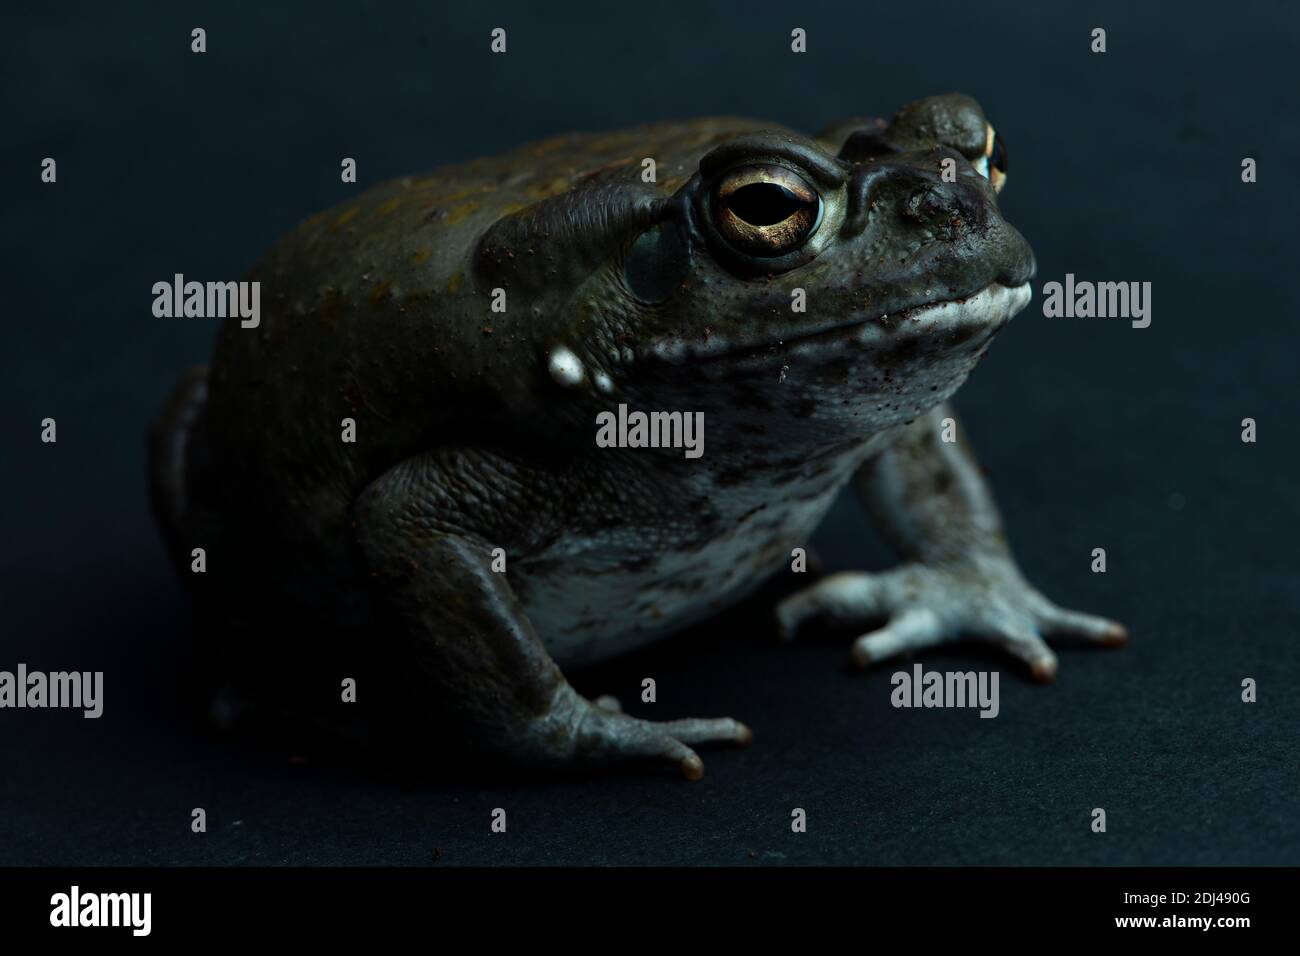 pet, toad, animal, amphibian, green, frog, tropical, isolated, cute, wildlife, sitting, funny, wild, small, nature, exotic,, beautiful, jumppet, pet, Stock Photo